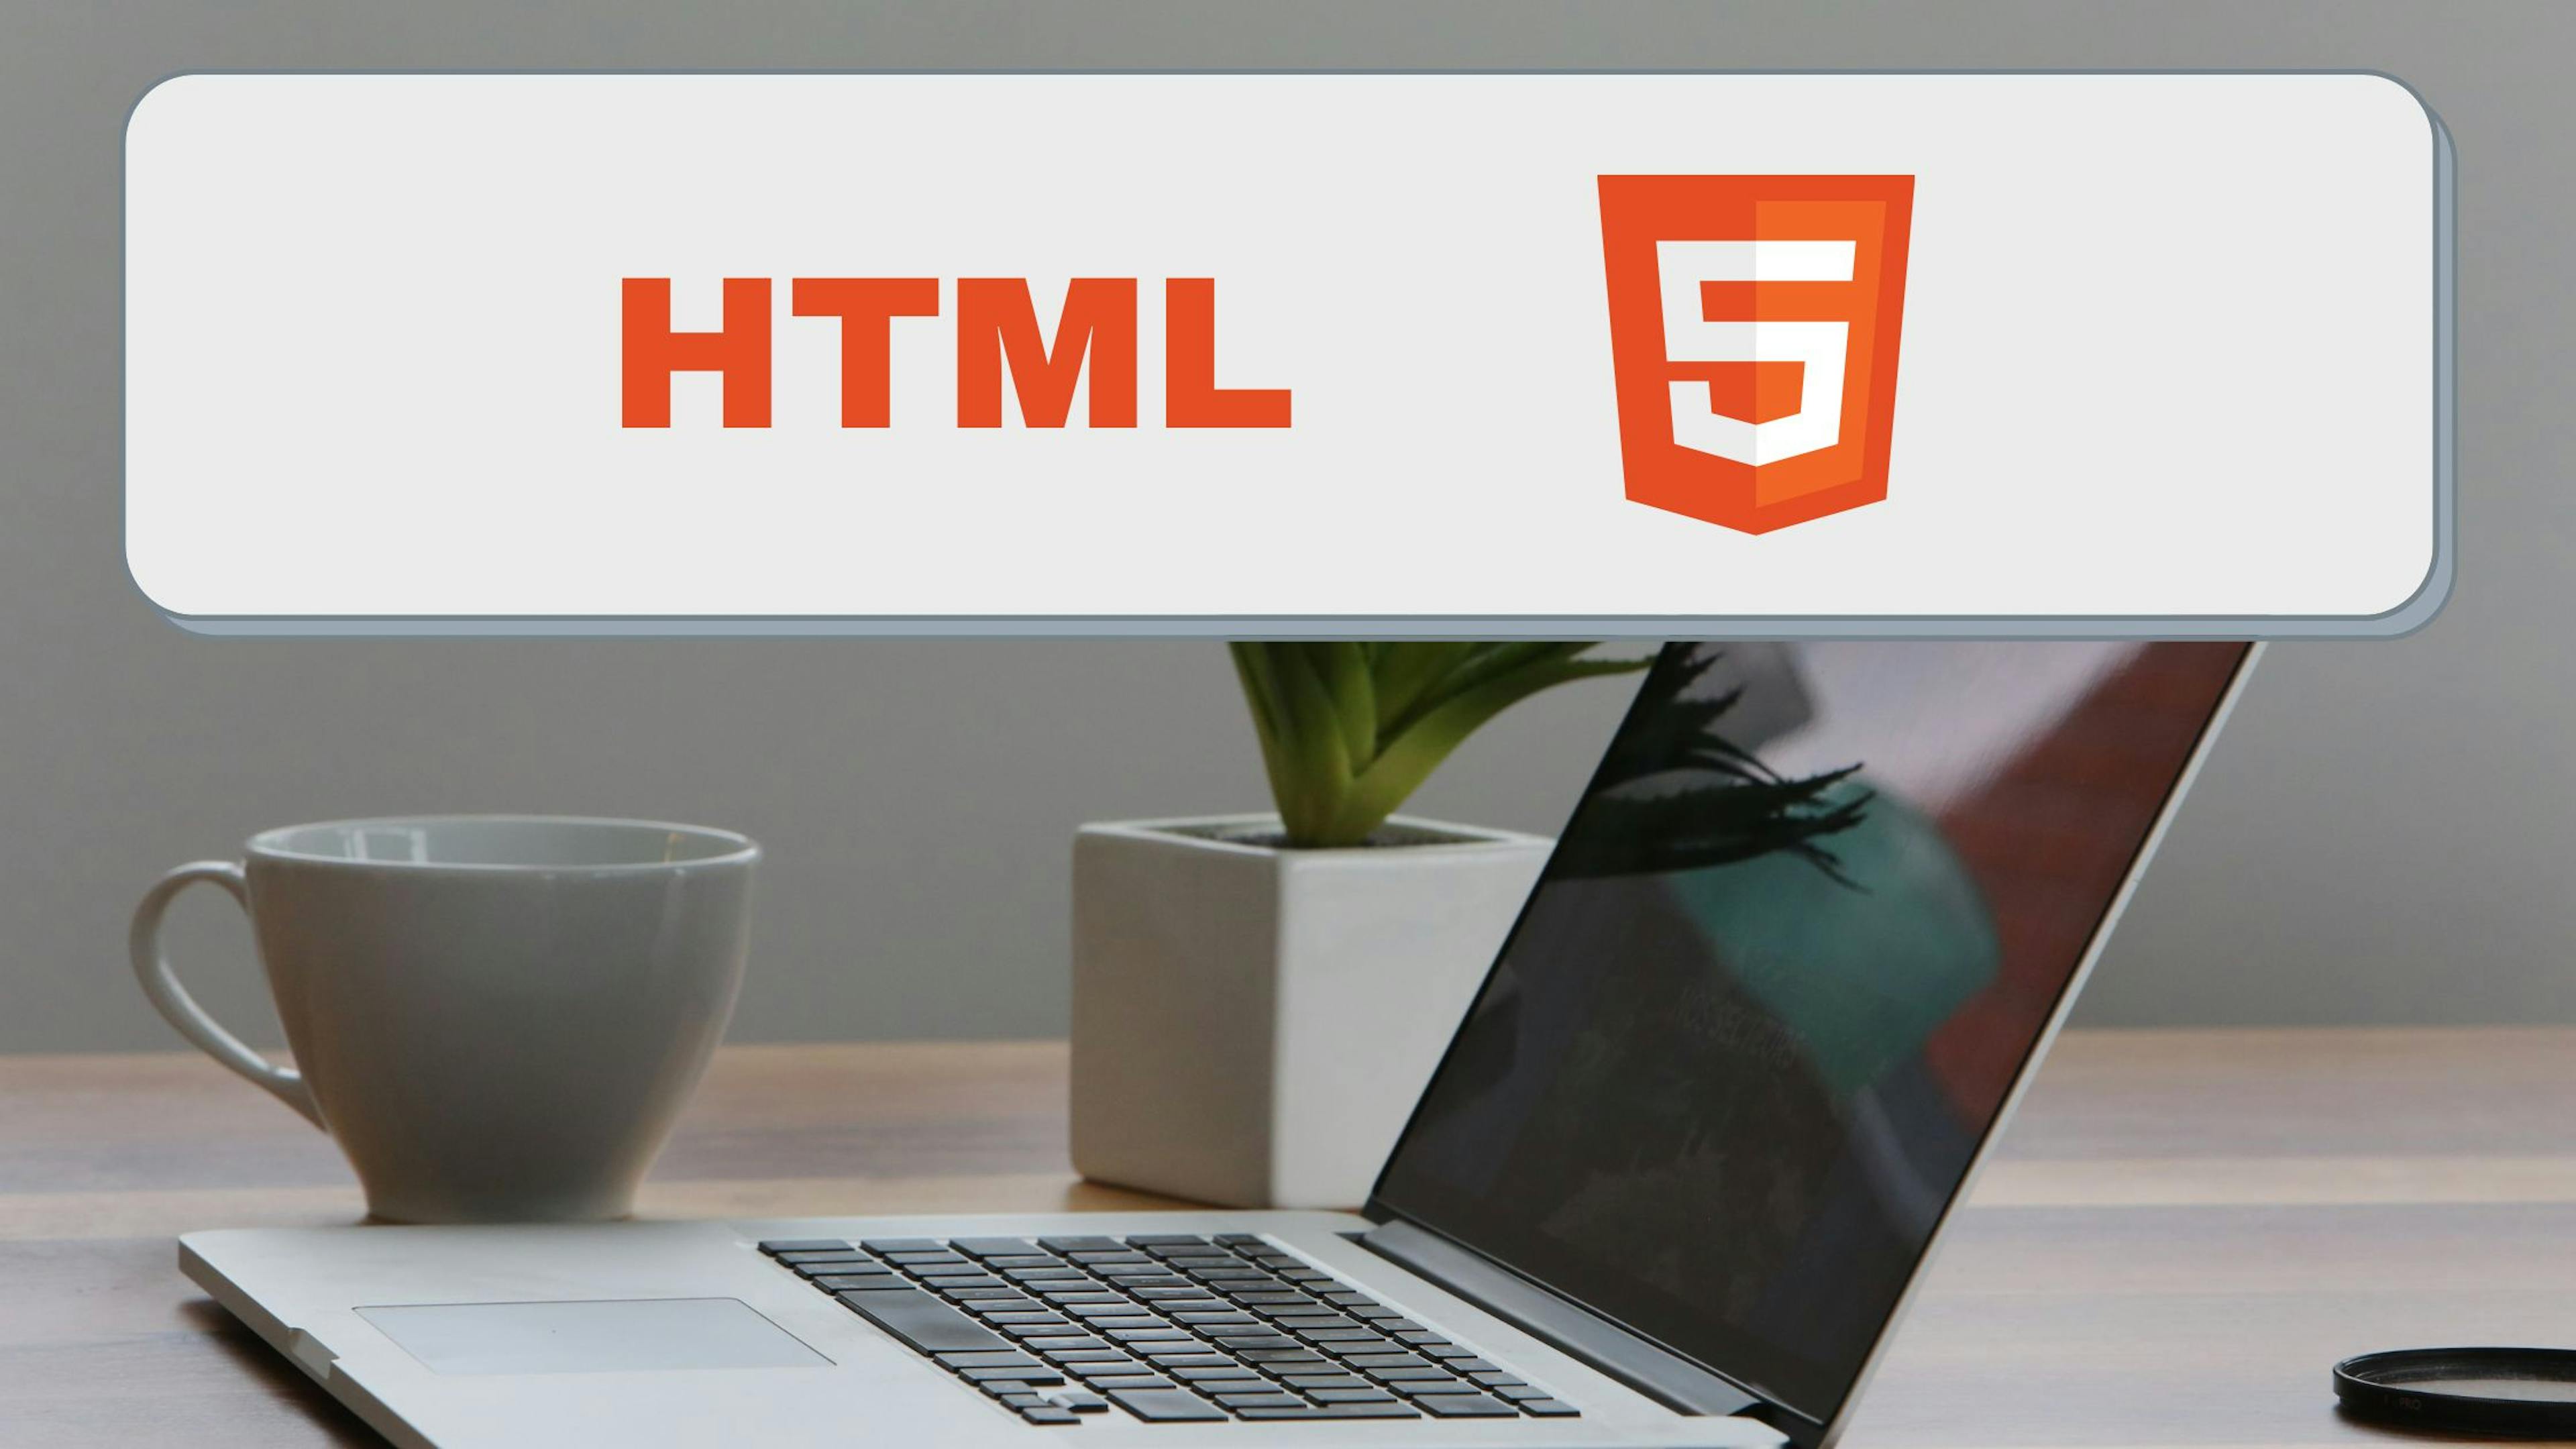 featured image - 9 Tips and Best Practices for HTML 5 